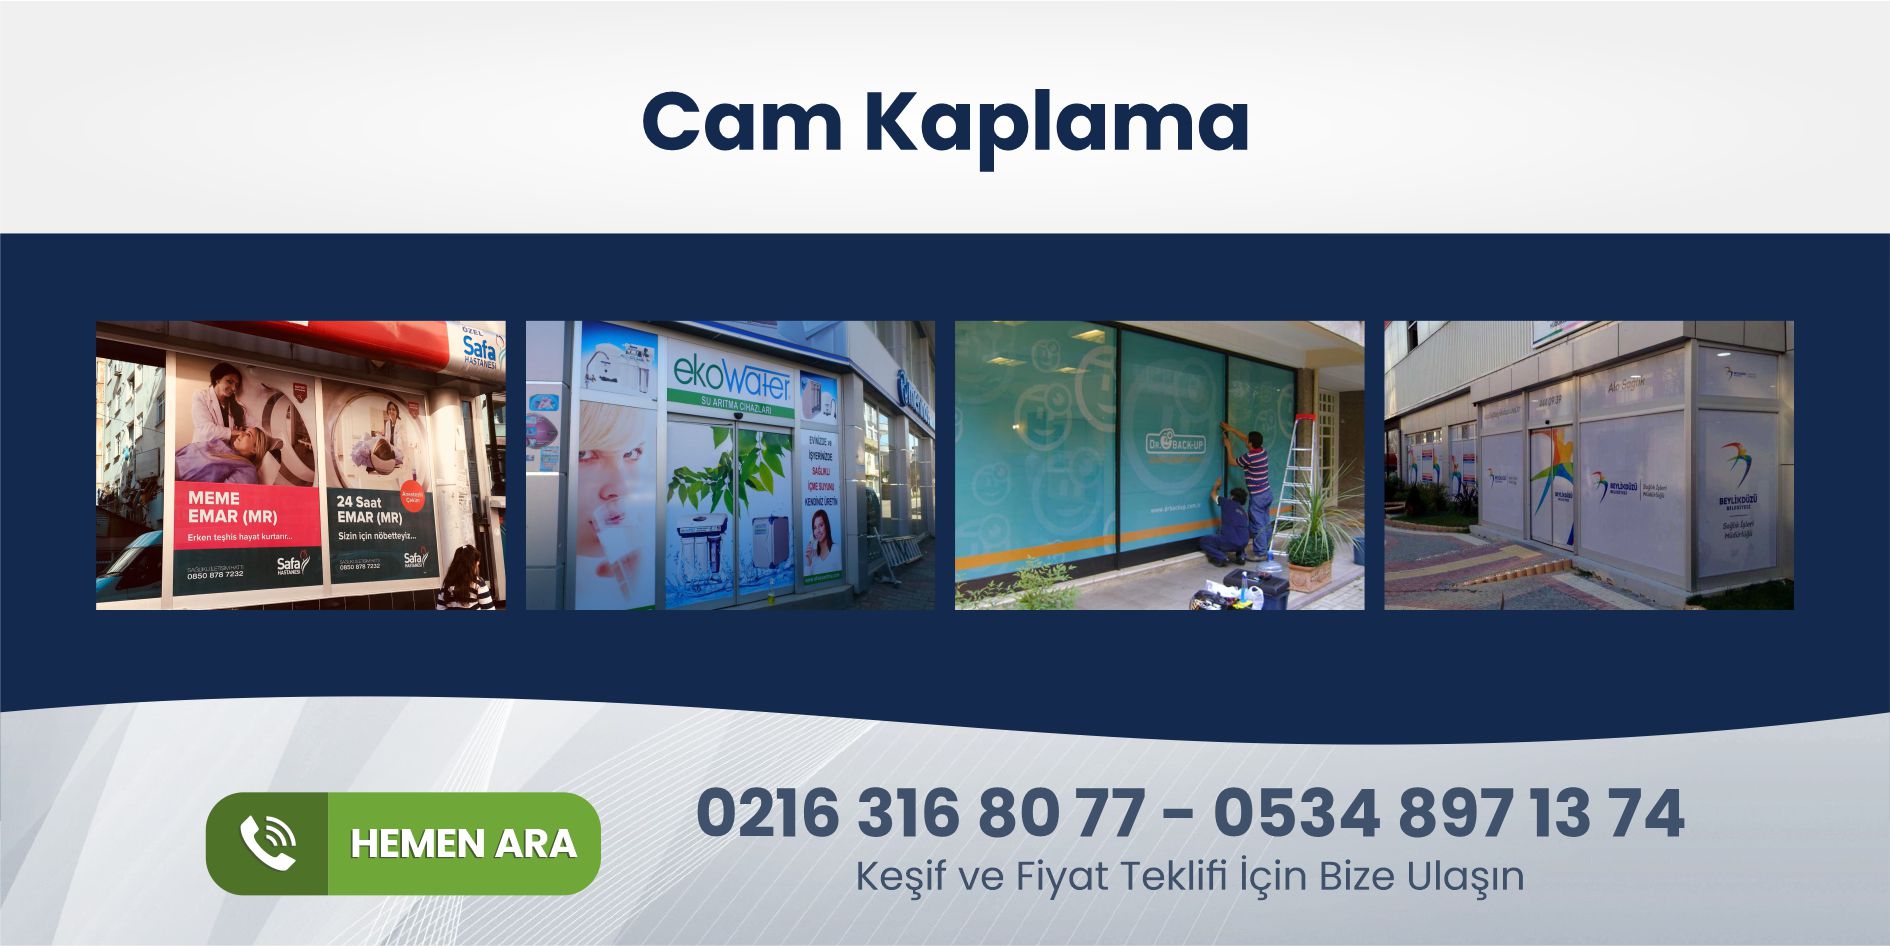 You are currently viewing Maltepe One Way Vision Cam Kaplama